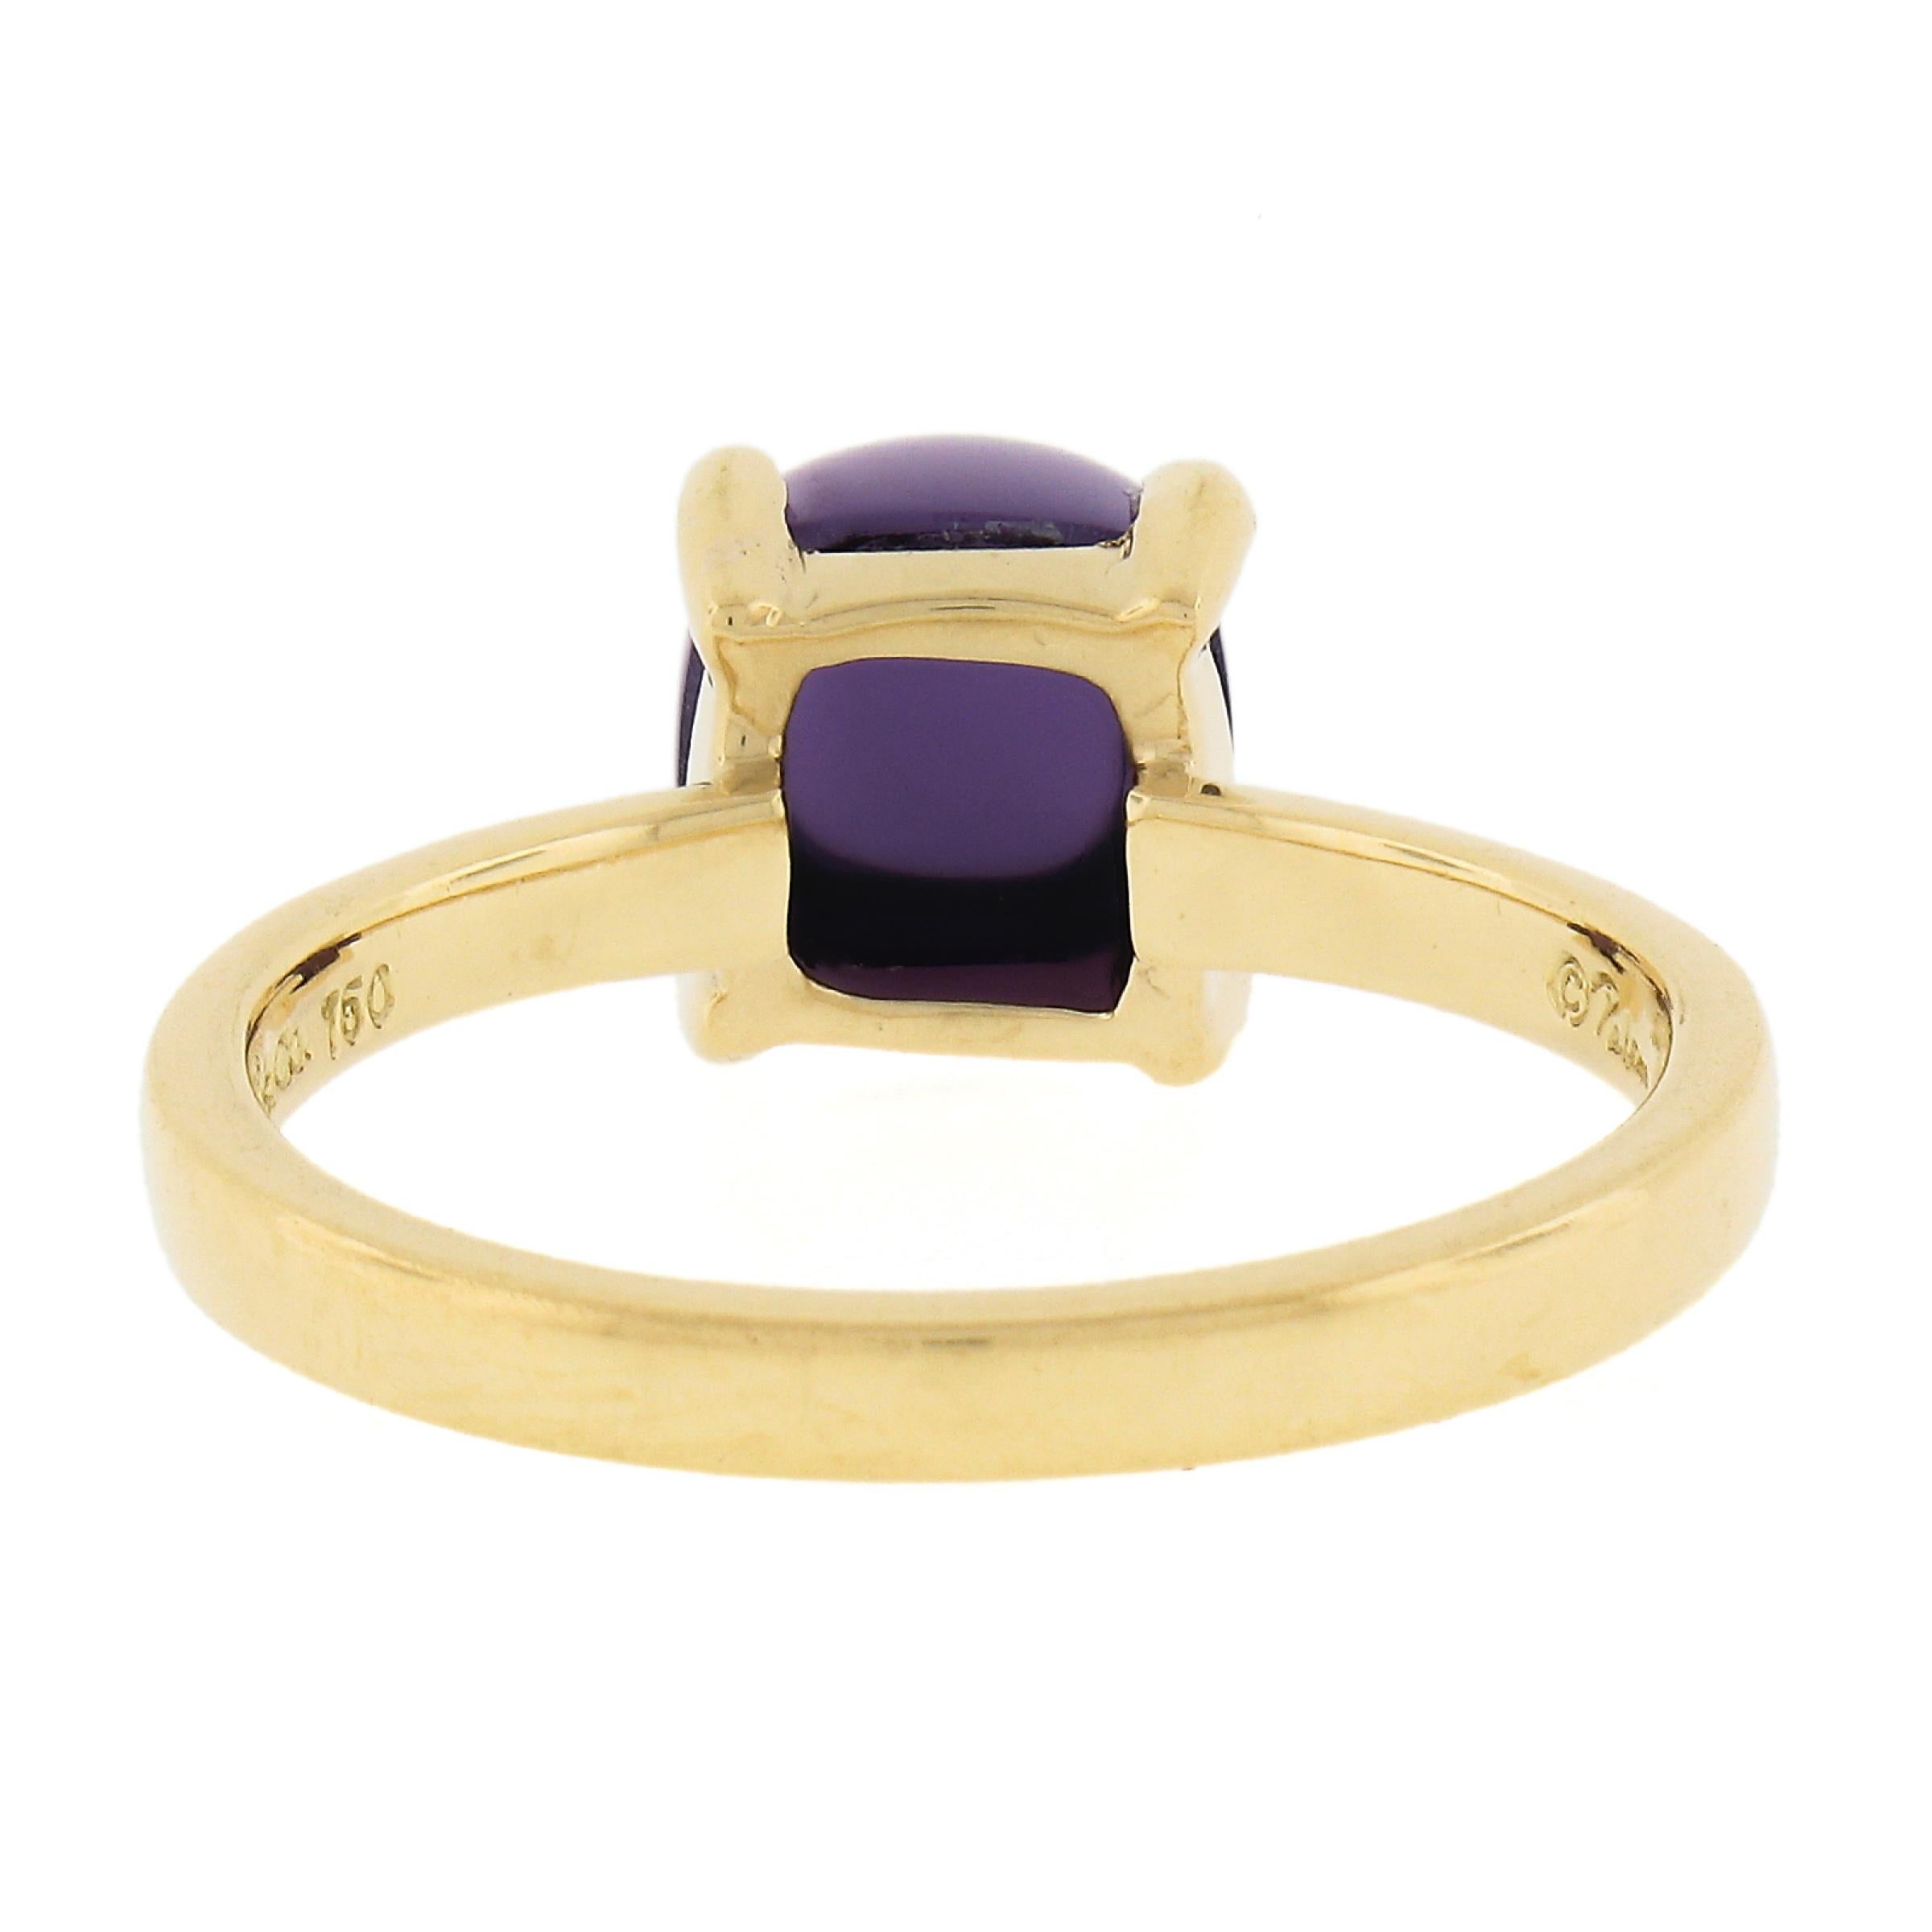 Tiffany & Co. 18k Gold Sugarloaf Cabochon Cut Amethyst Solitaire Cocktail Ring 2